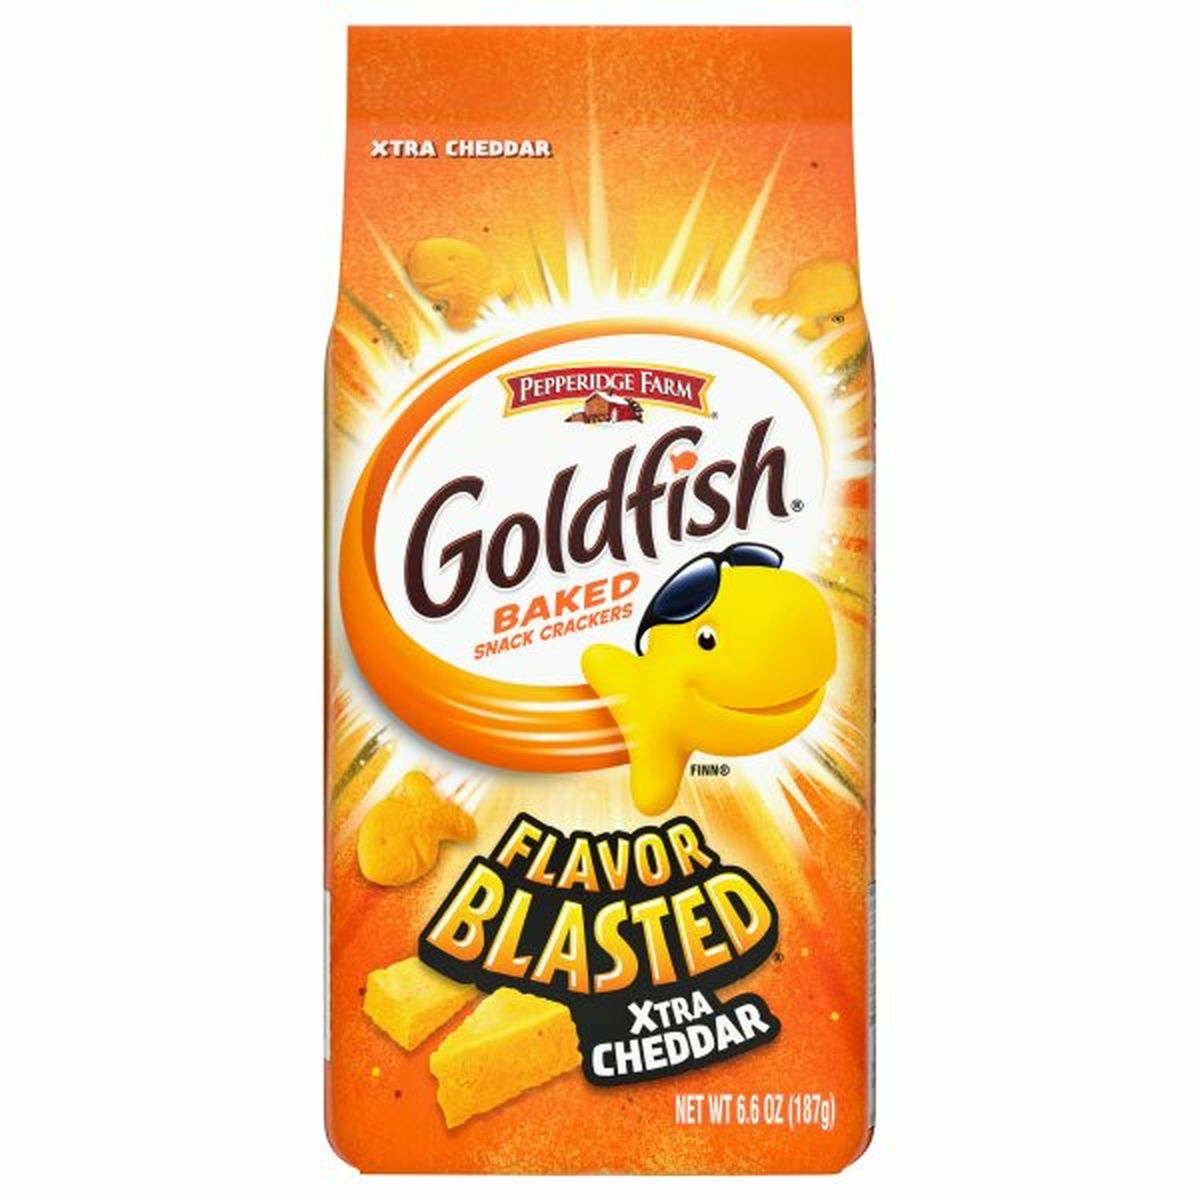 Calories in Pepperidge Farms  Goldfish Flavor Blasteds Flavor Blasted Baked Snack Crackers, Xtra Cheddar